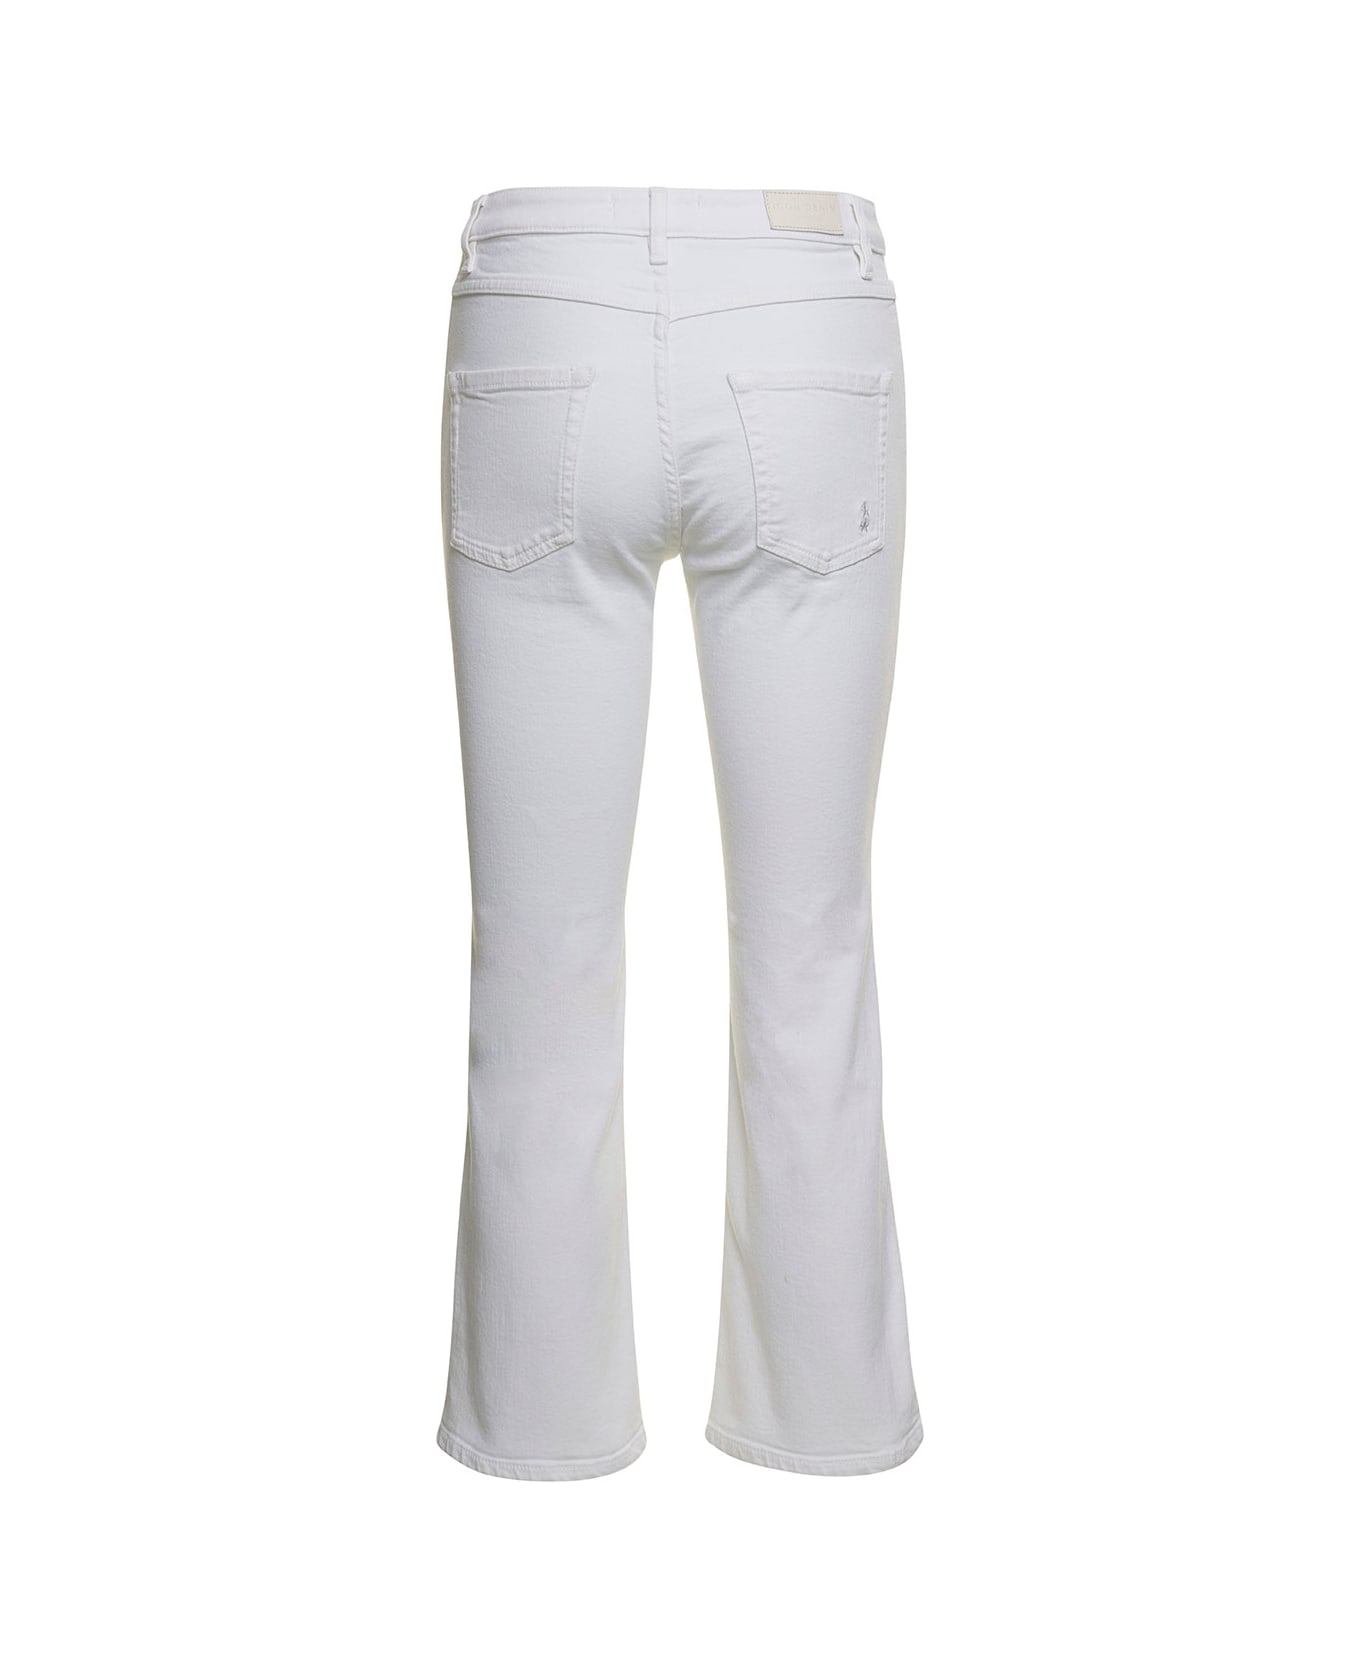 Icon Denim 'pam' White Five-pockets Flared Jeans In Cotton Blend Denim Woman - White ボトムス